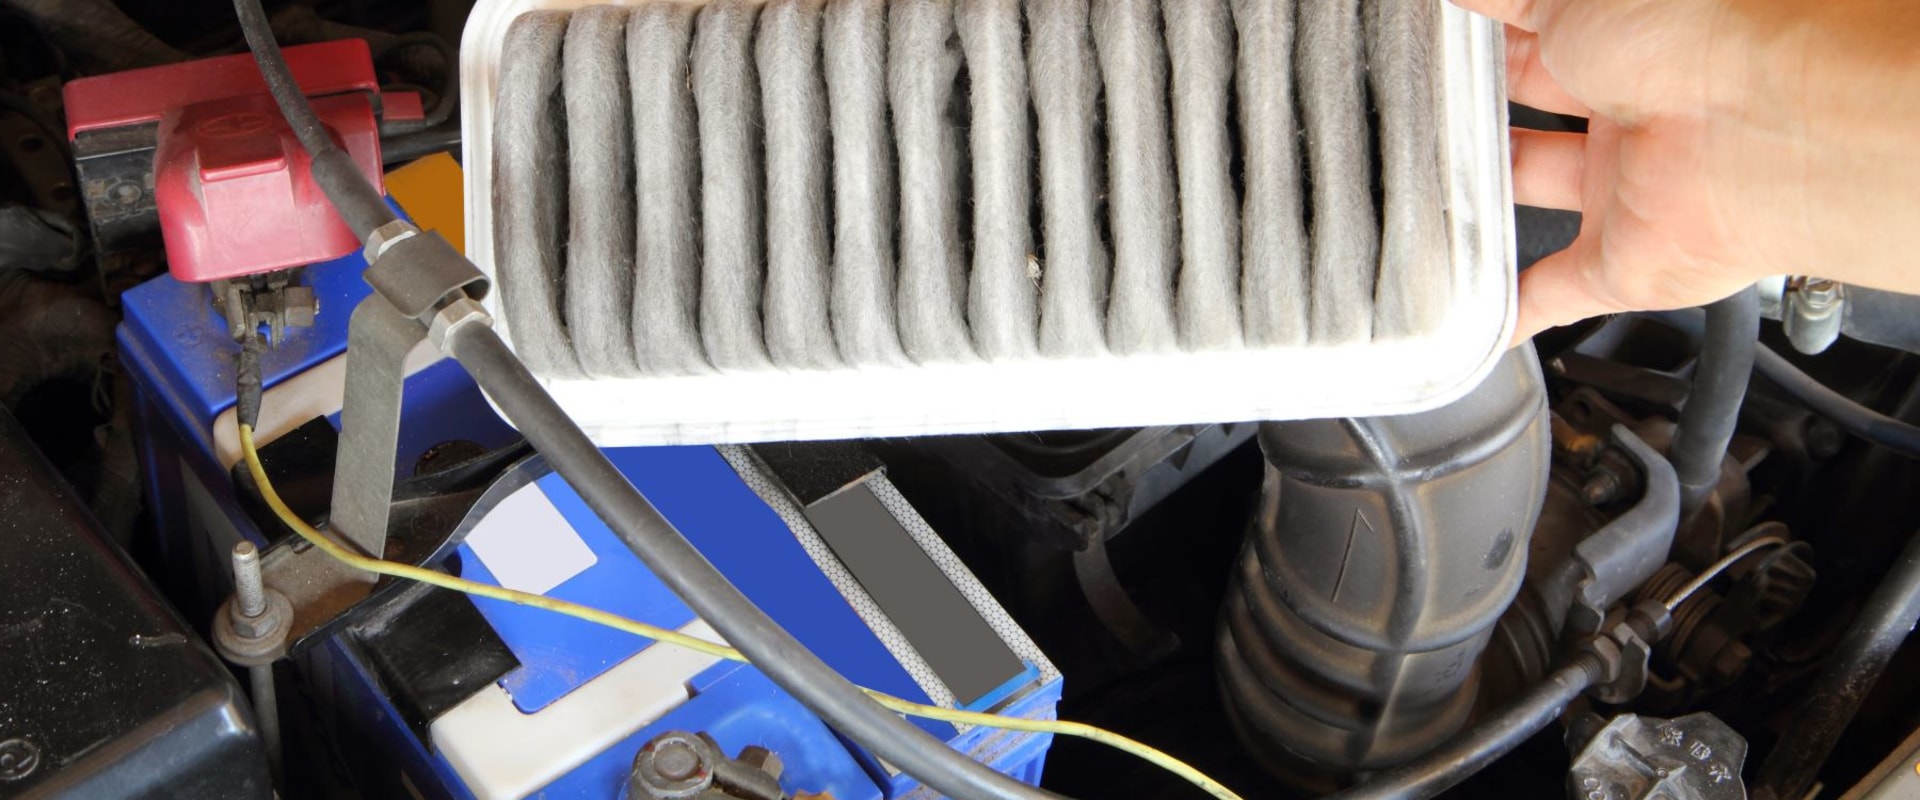 What happens if i drive with dirty air filter?